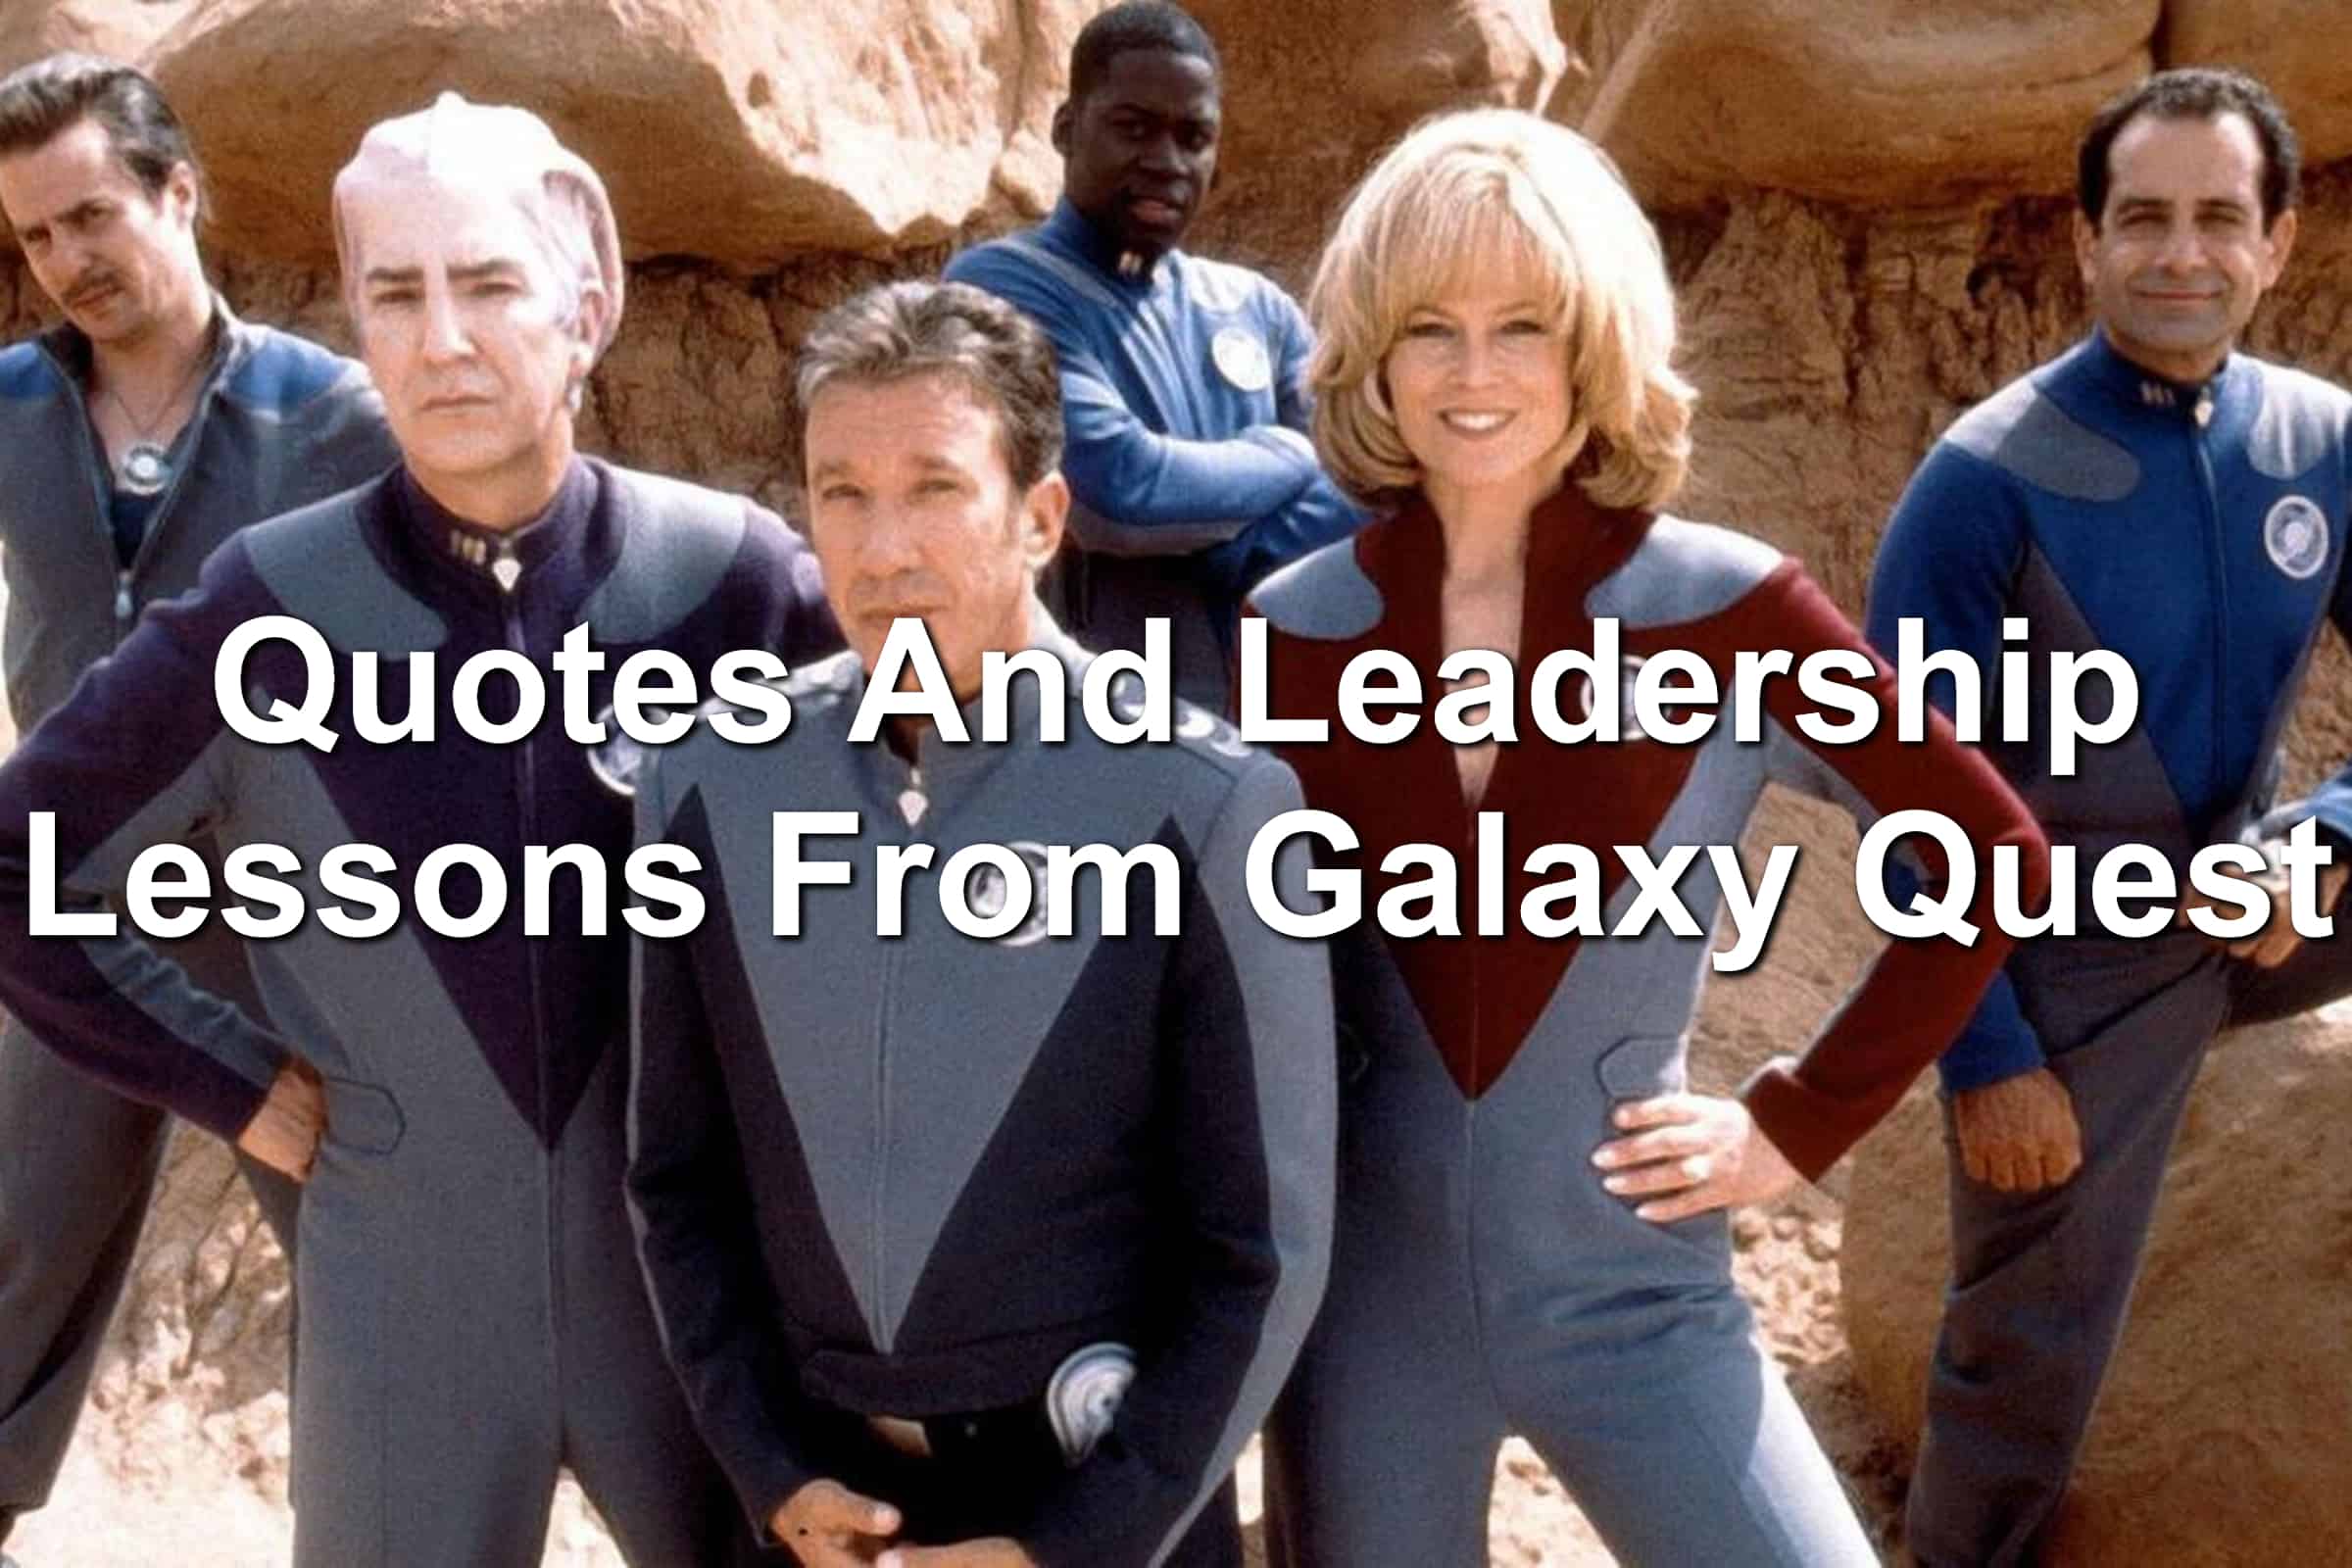 Cast of Galaxy Quest posing heroically.